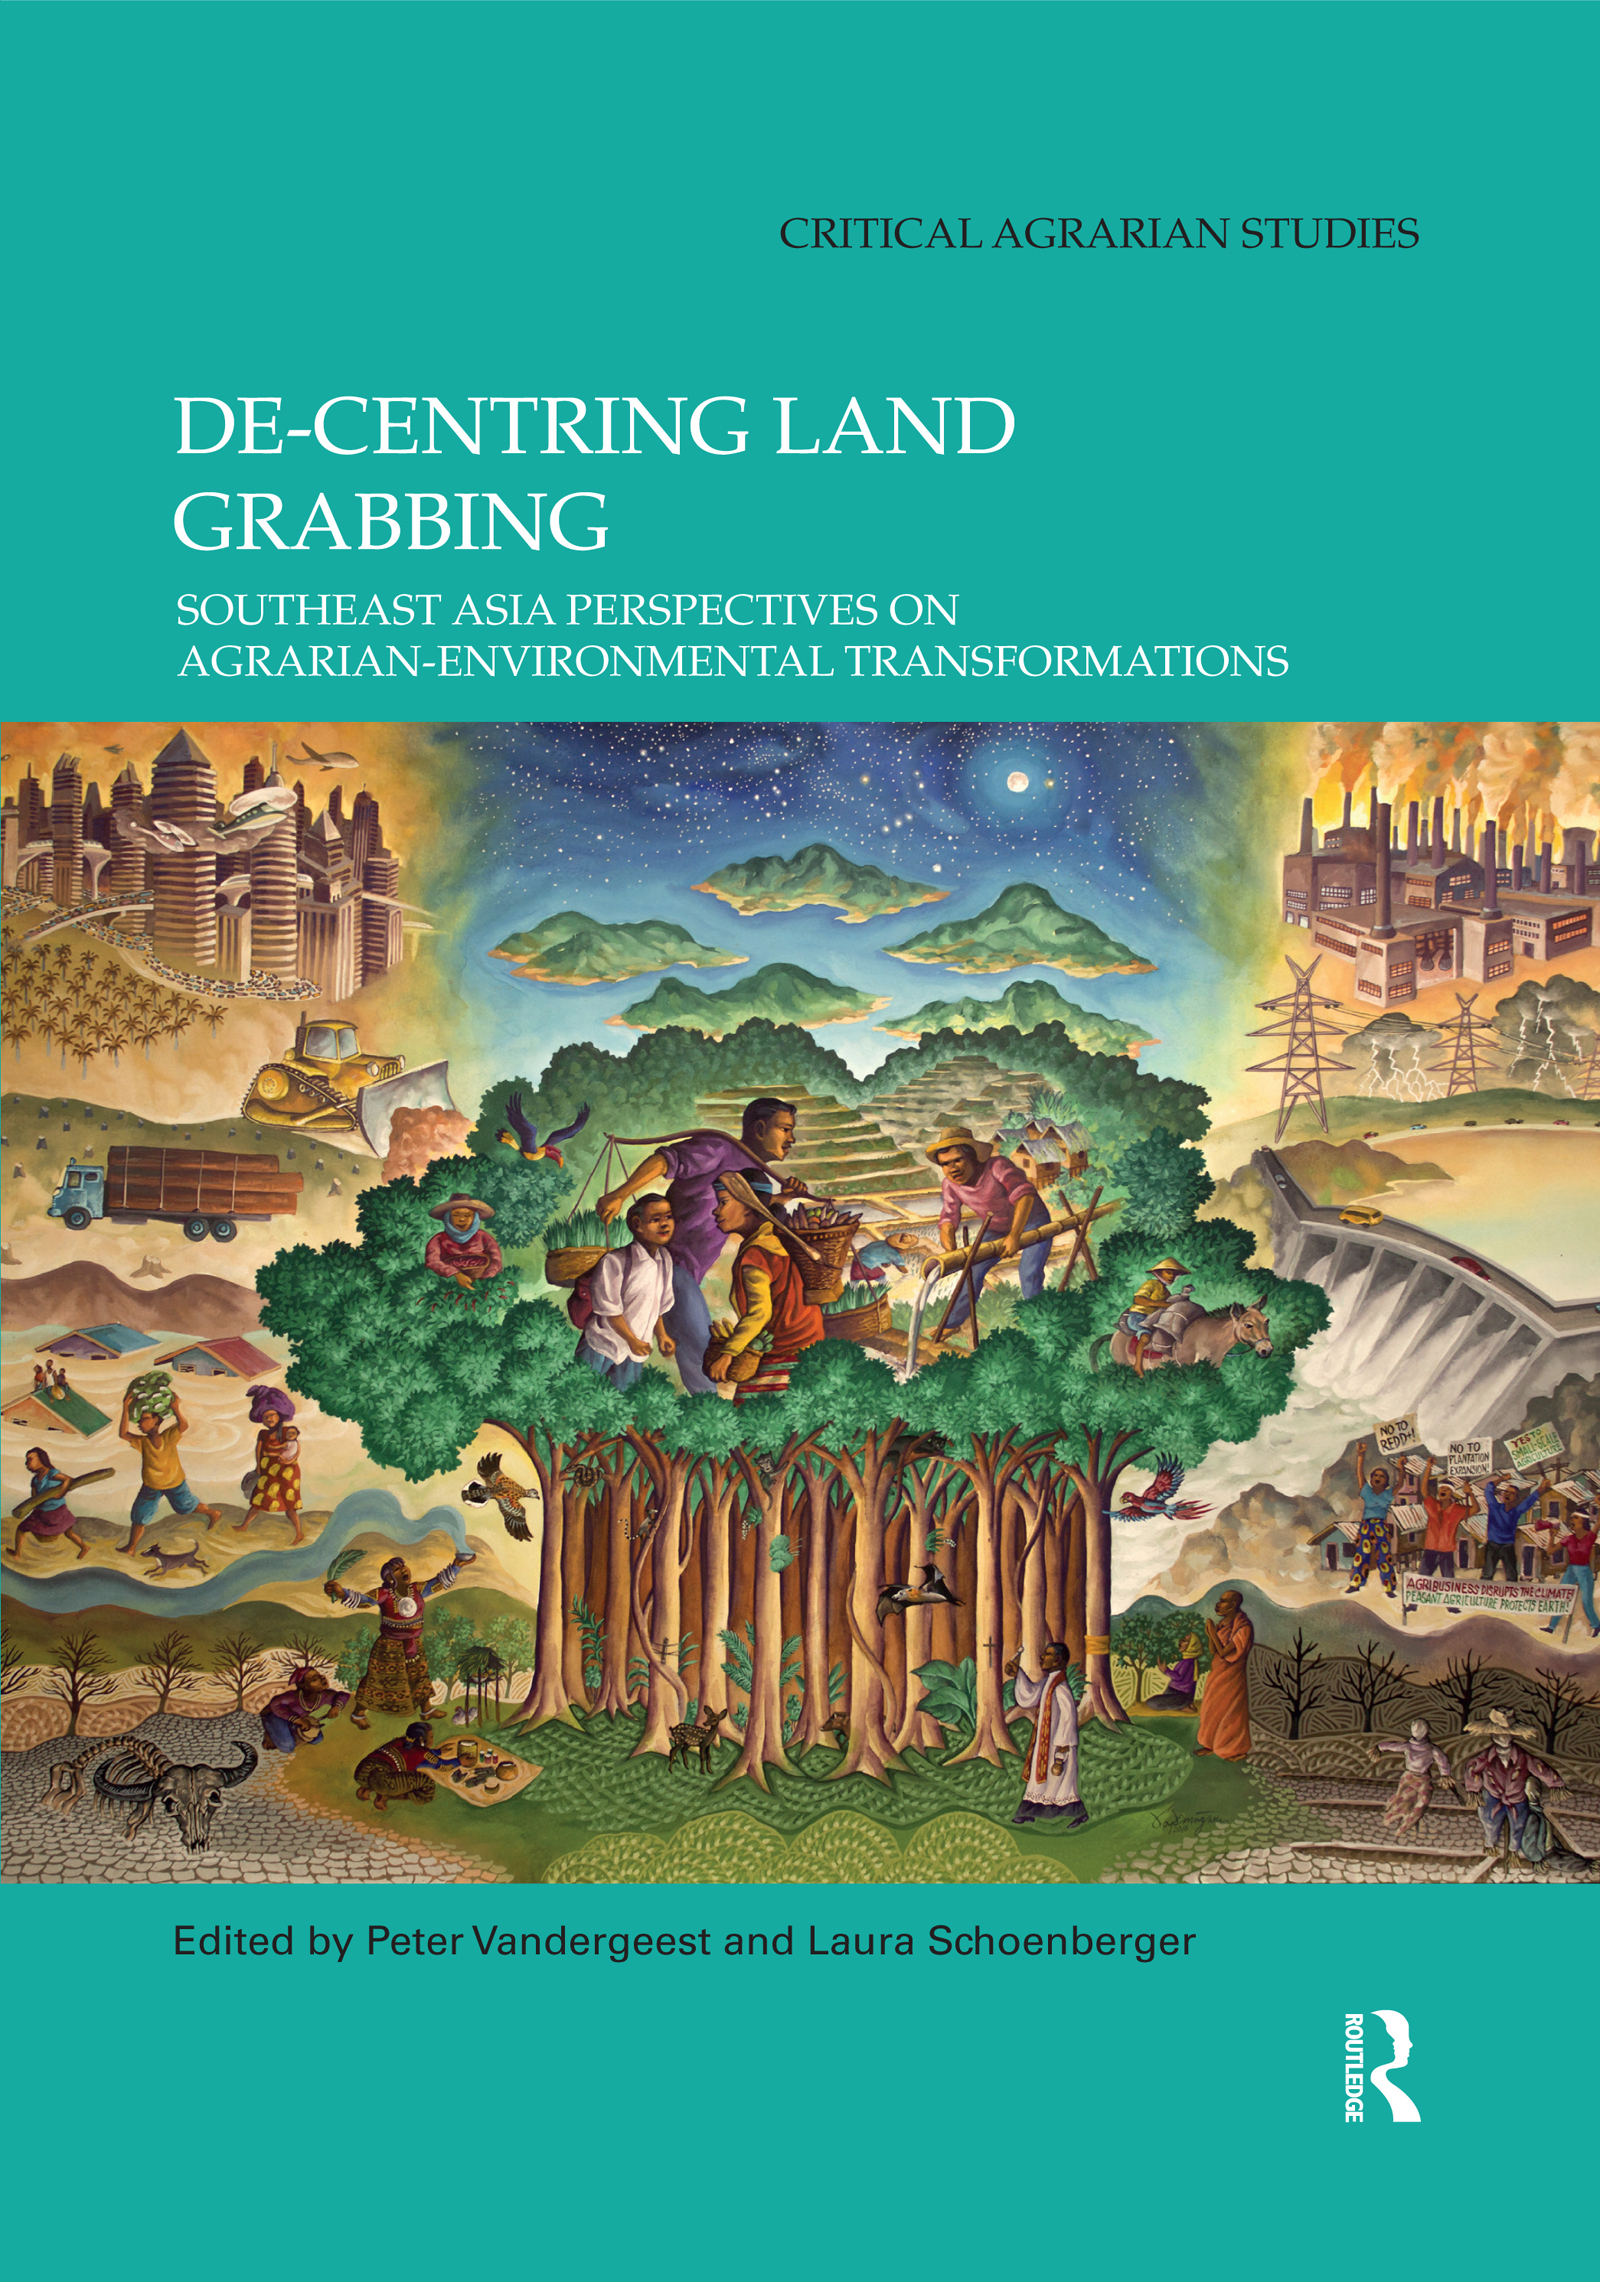 De-centring Land Grabbing (Edited by Peter Vandergeest and Laura Schoenberger) Promo Image